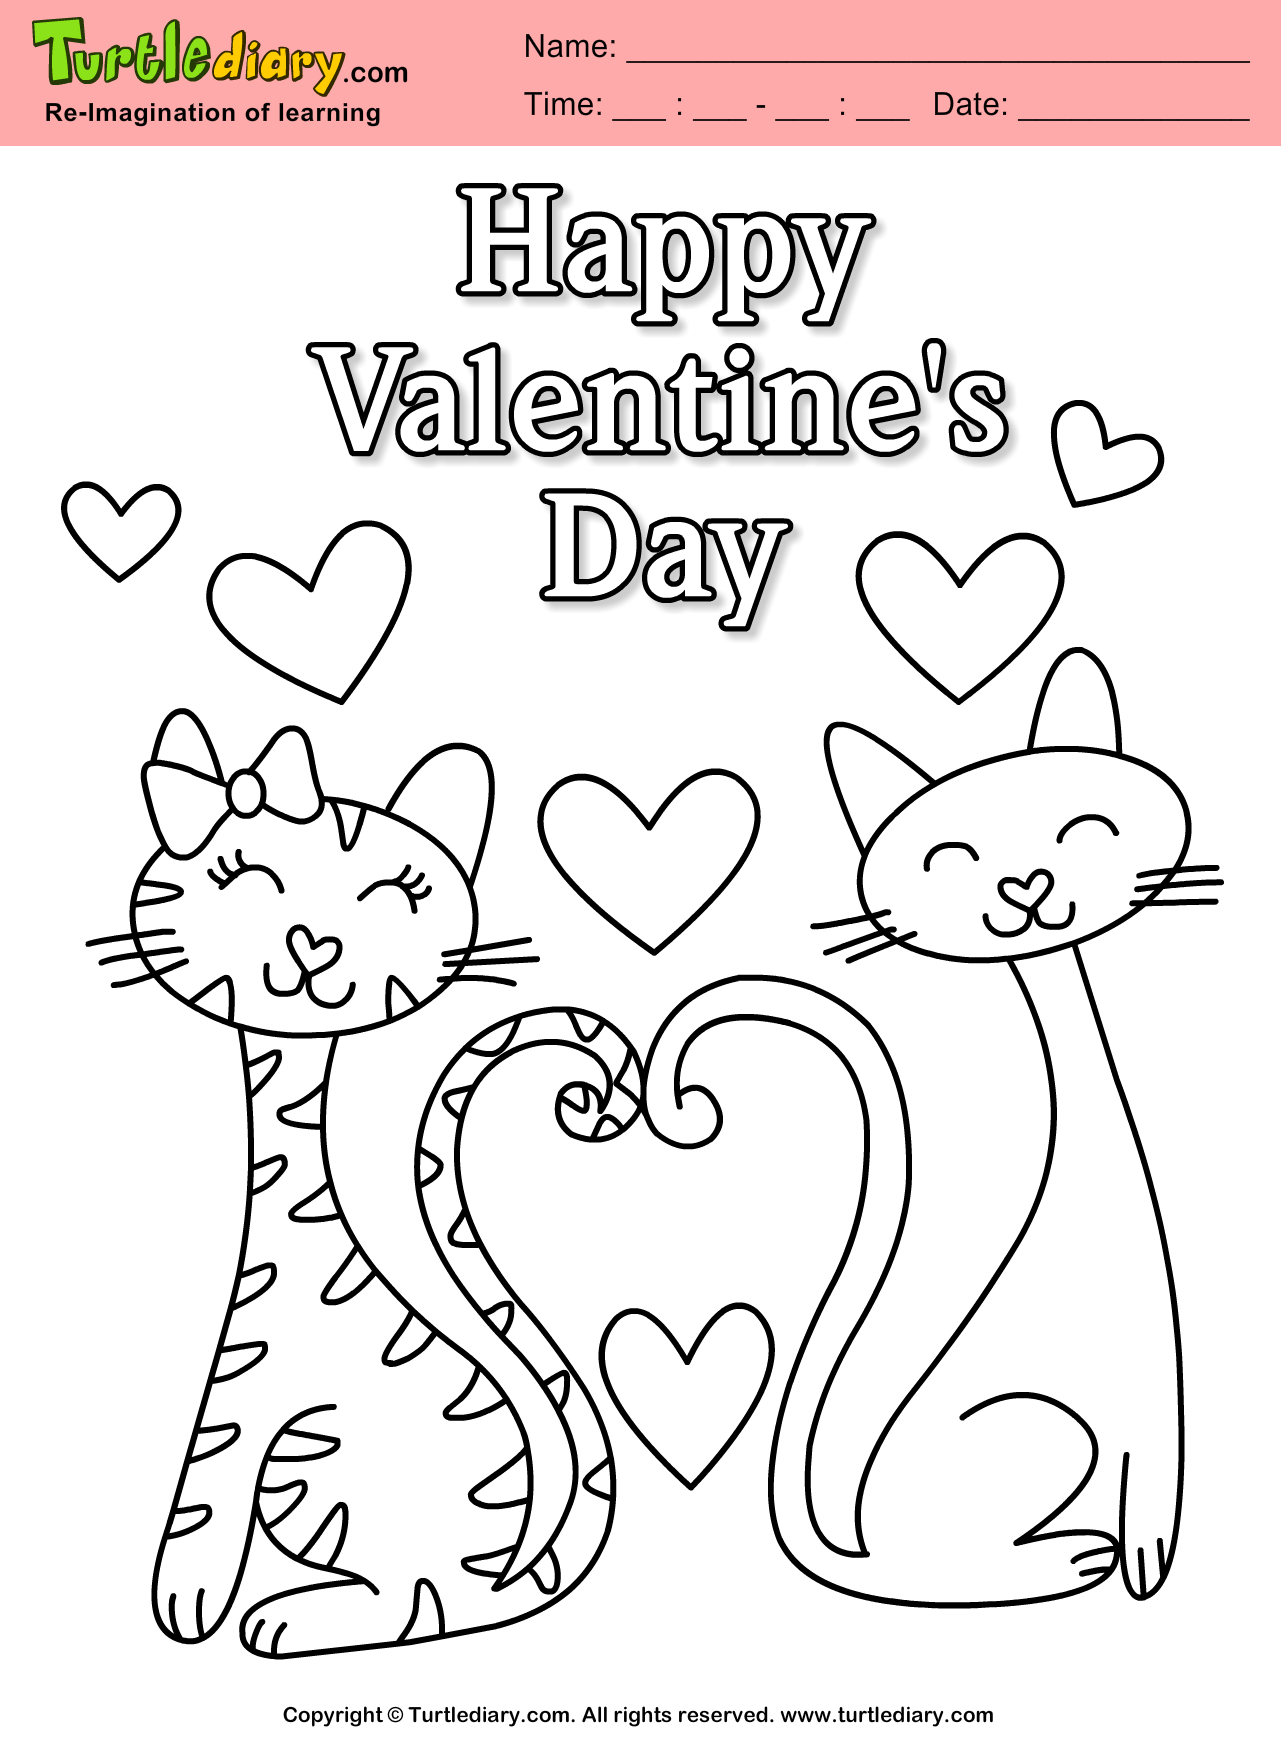 Valentines Day Coloring Page Happy Valentines Day Coloring Sheet Turtle Diary